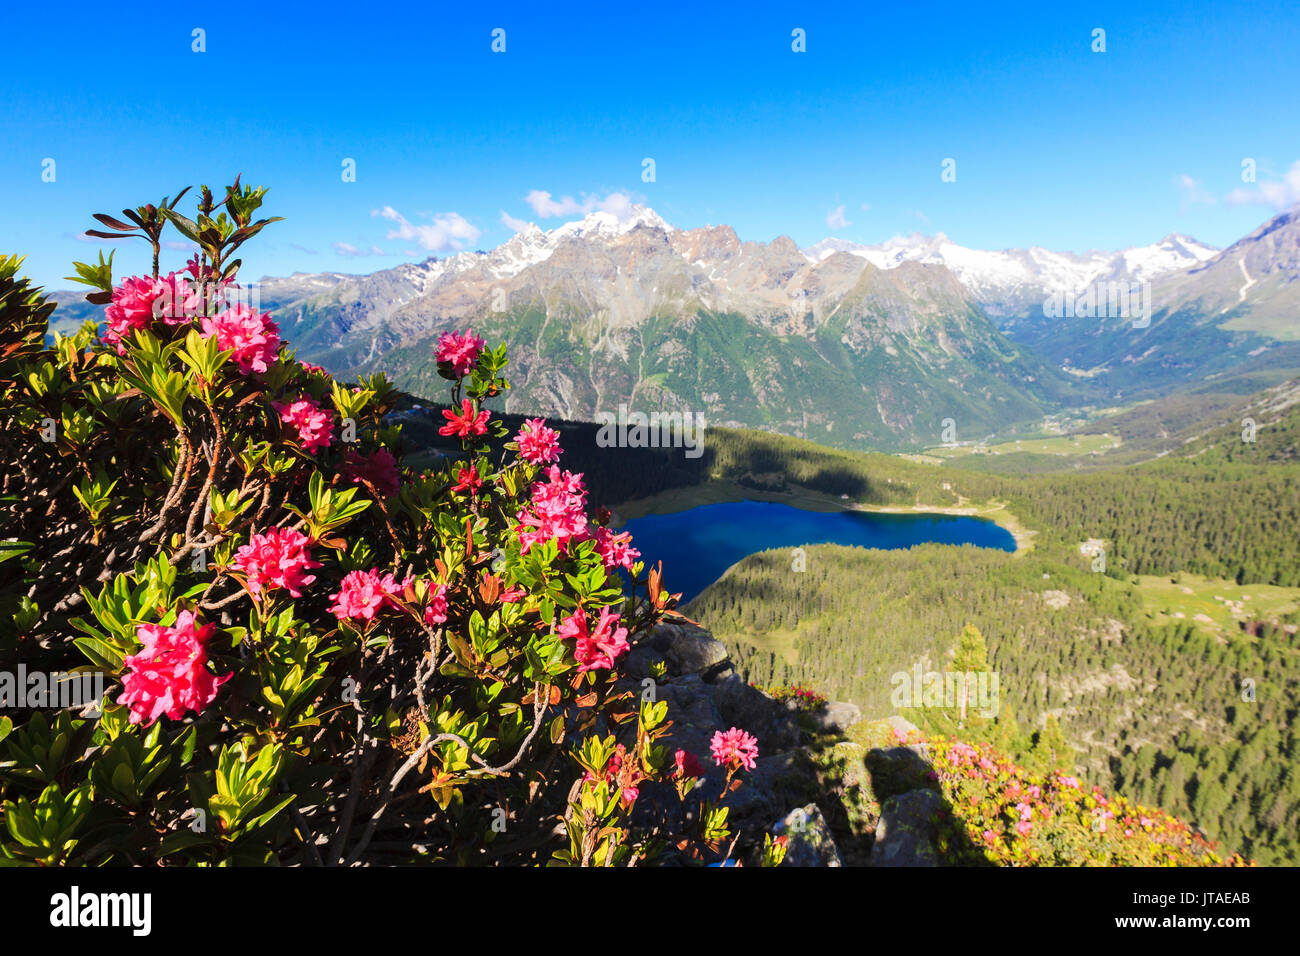 Rhododendrons and Lake Palu framed by Mount Disgrazia seen from Monte Roggione, Malenco Valley, Valtellina, Lombardy, Italy Stock Photo